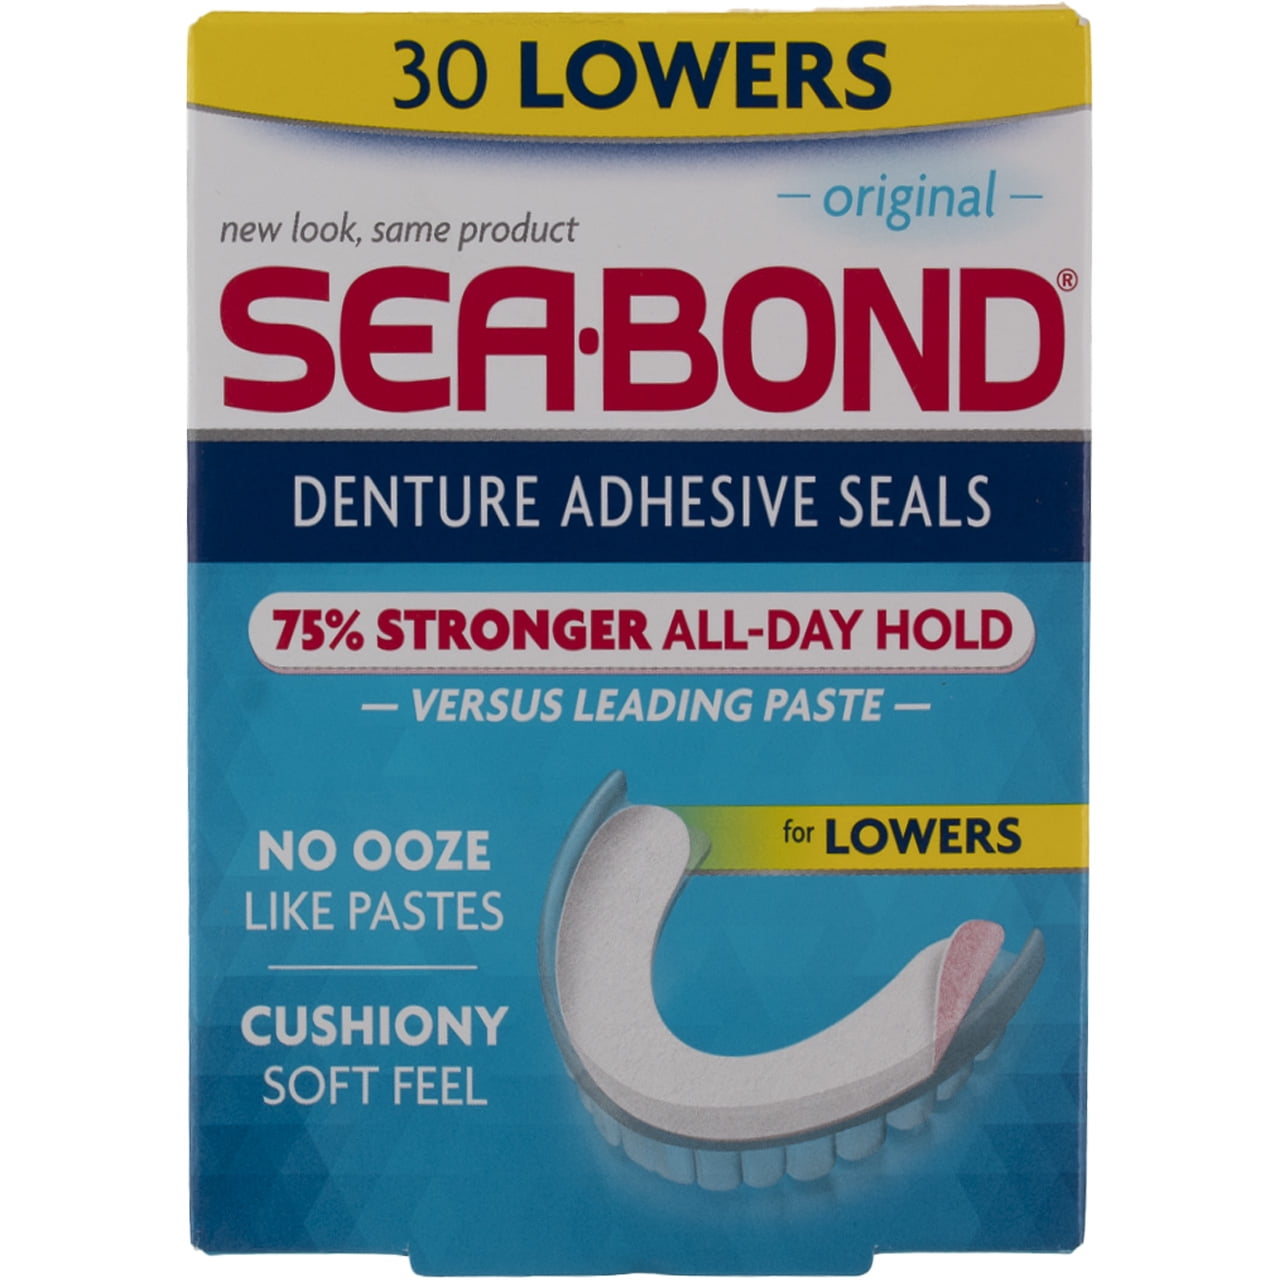 Sea-Bond Products Wholesale Supplier in USA - OTC Superstore LLC